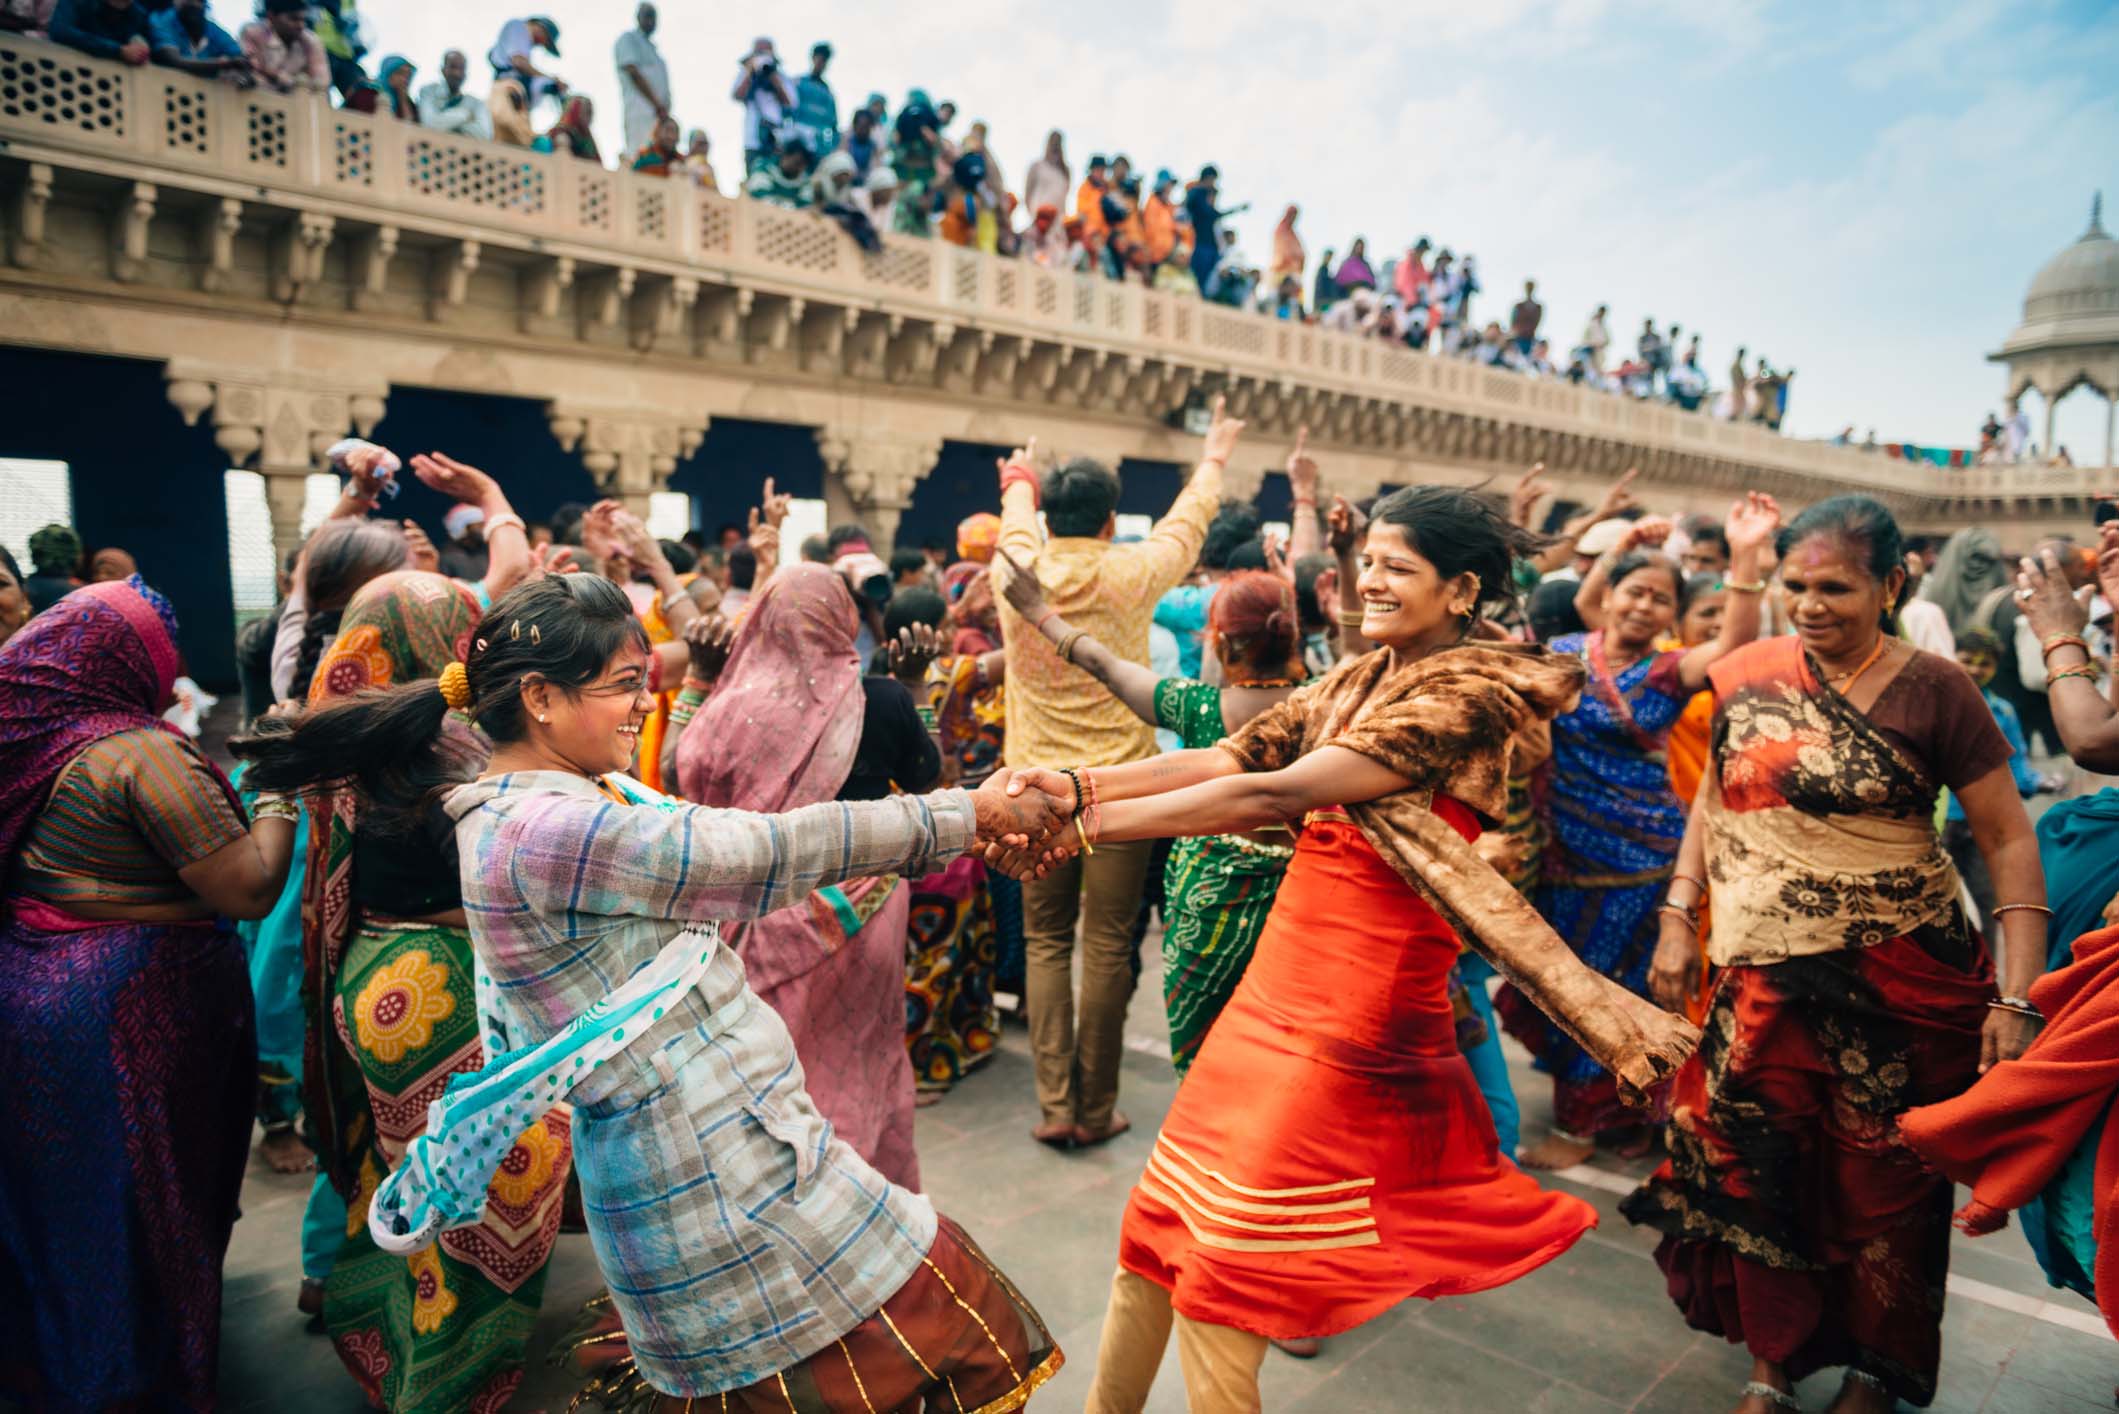 People dancing and celebrating holi in India.